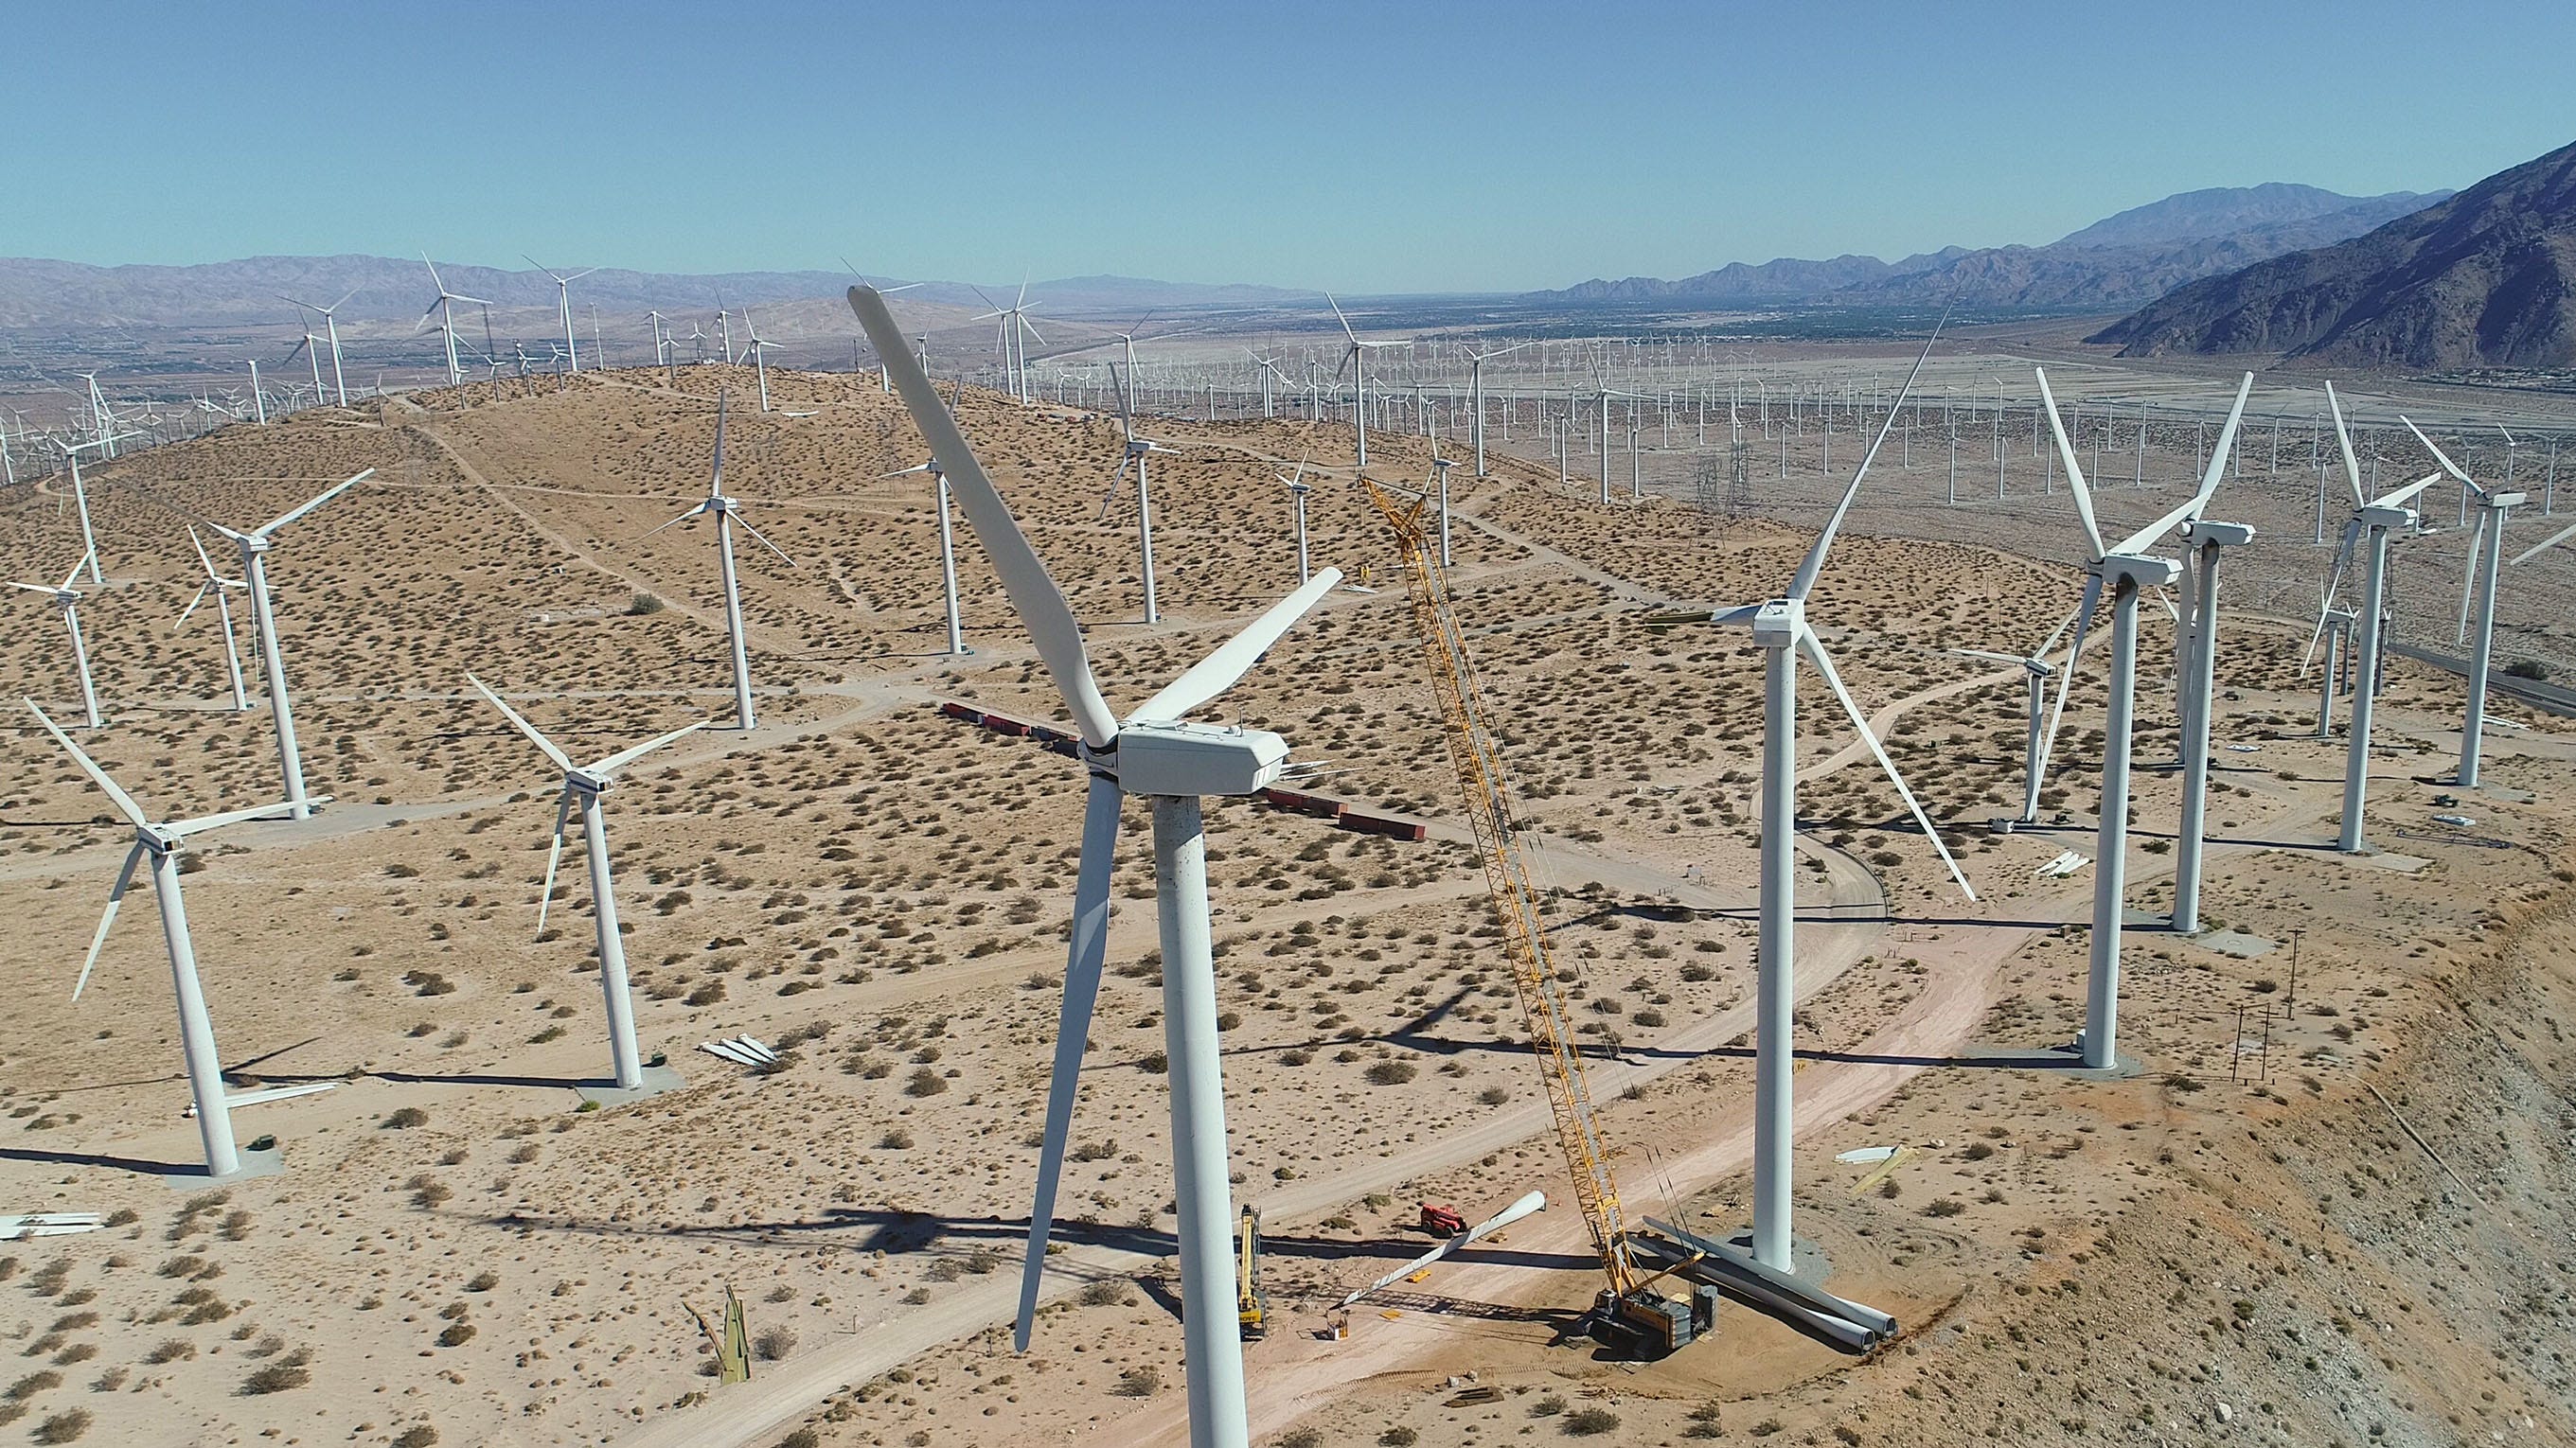 Palm Springs' iconic wind farms could change dramatically